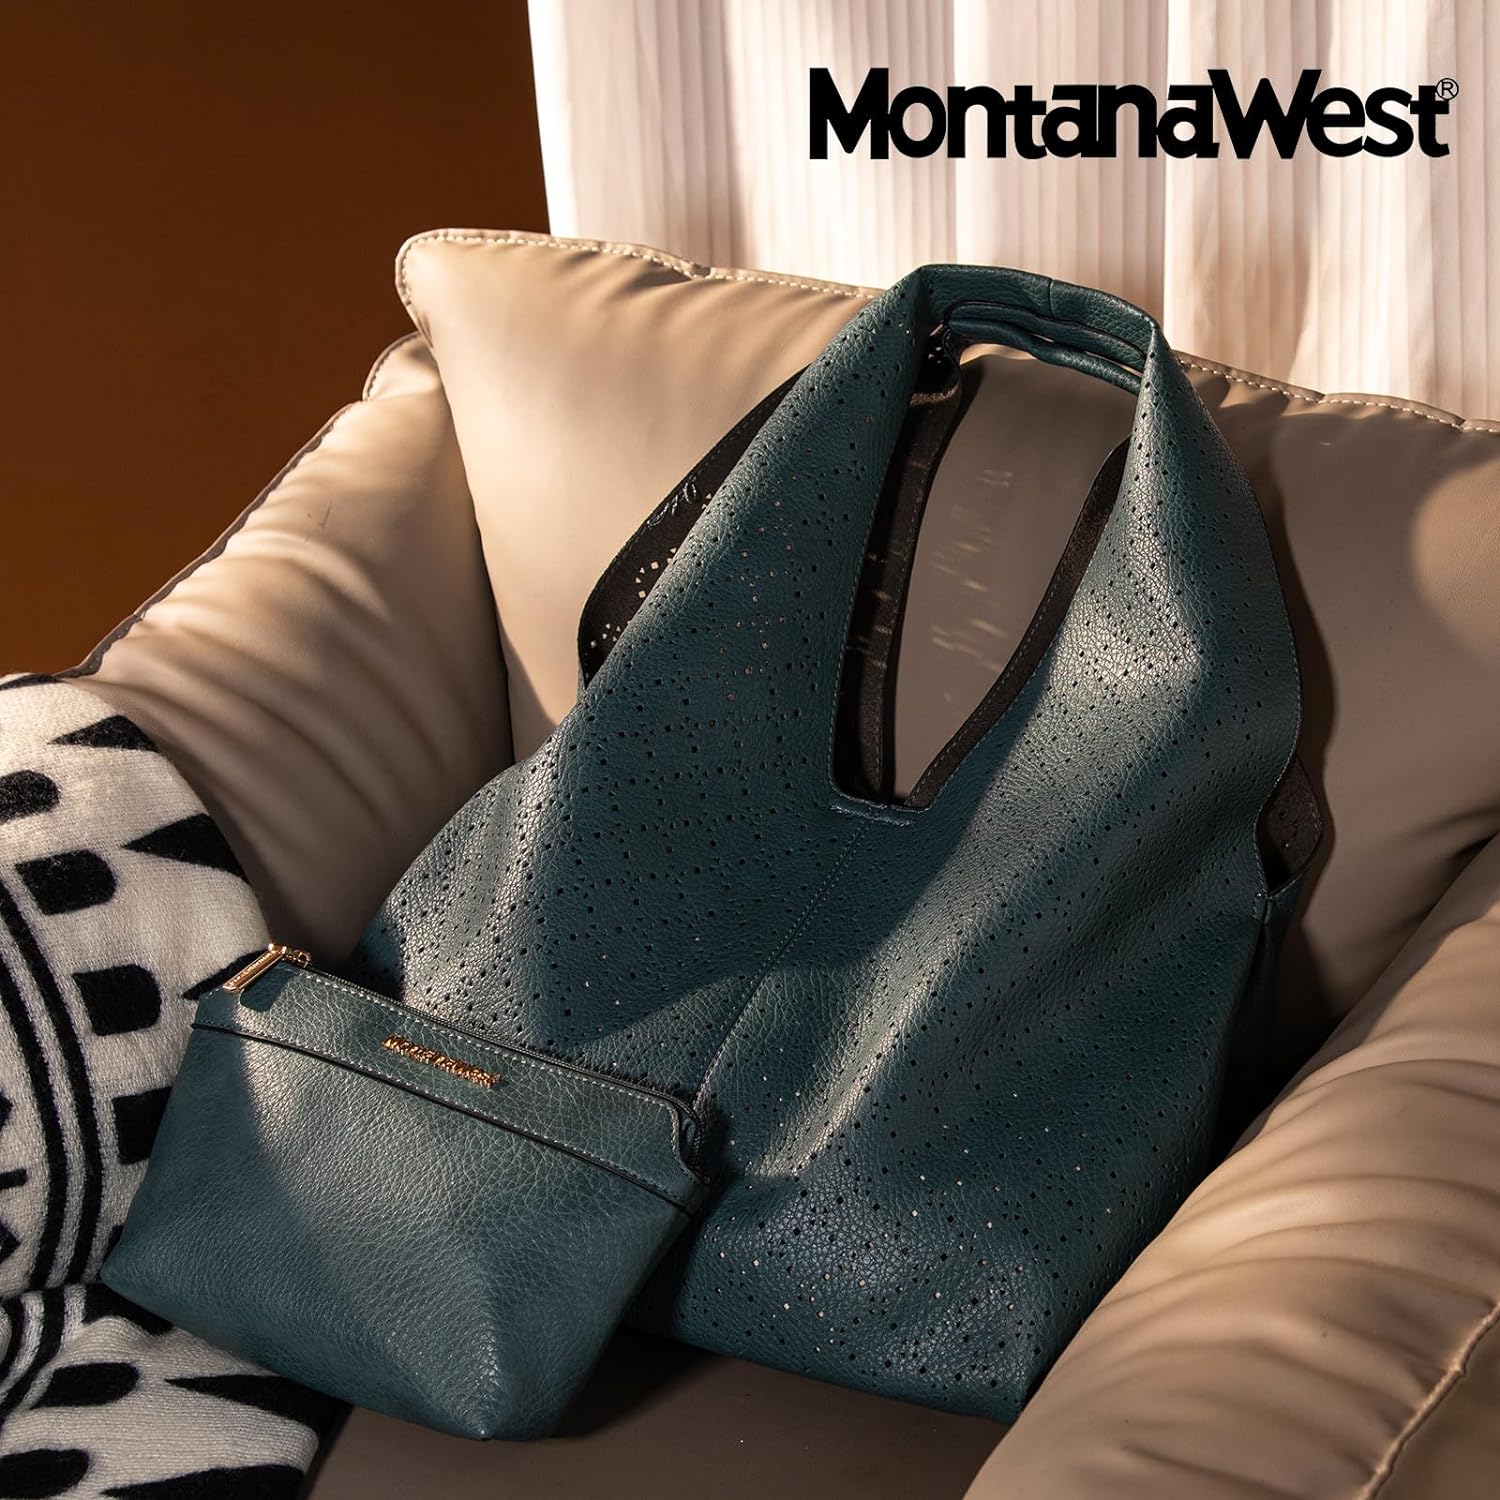 Montana West Hobo Bags Review